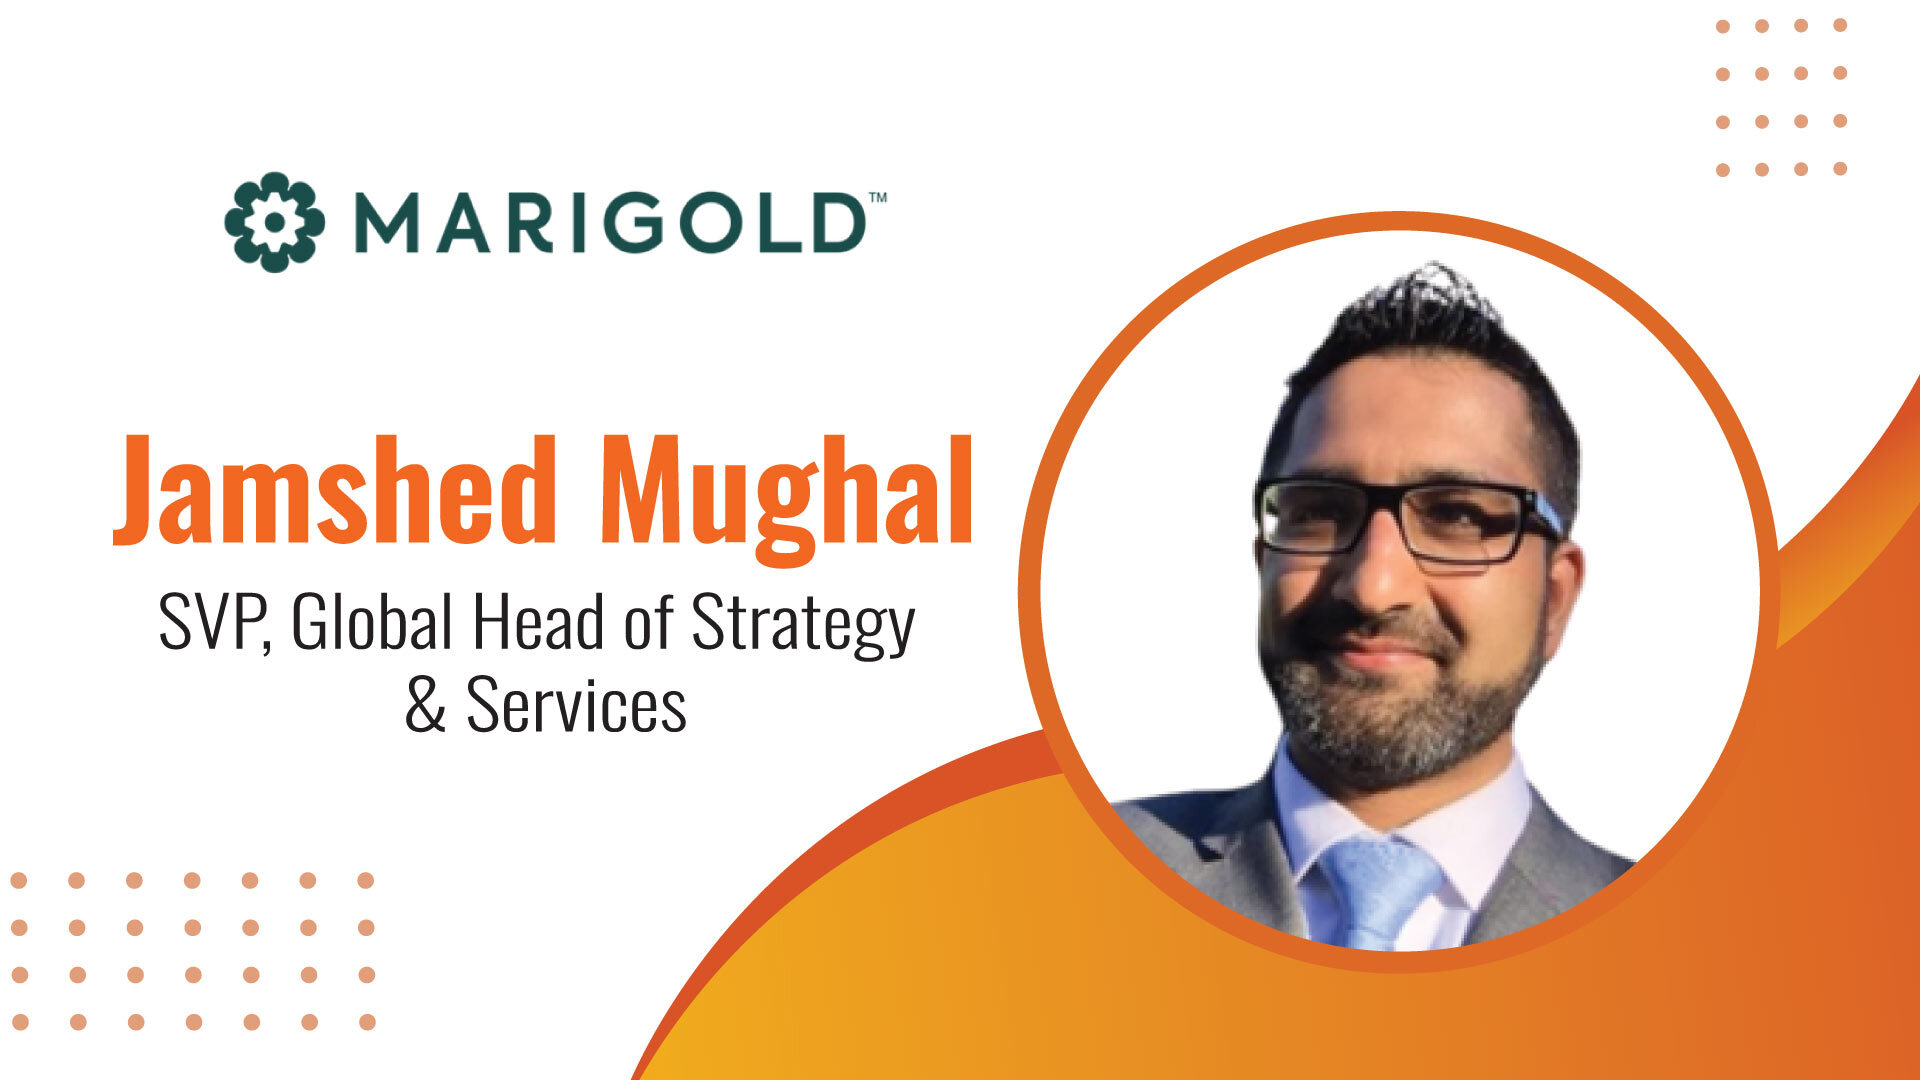 MarTech Edge Interview with Jamshed Mughal, SVP, Global Head of Strategy & Services, Marigold